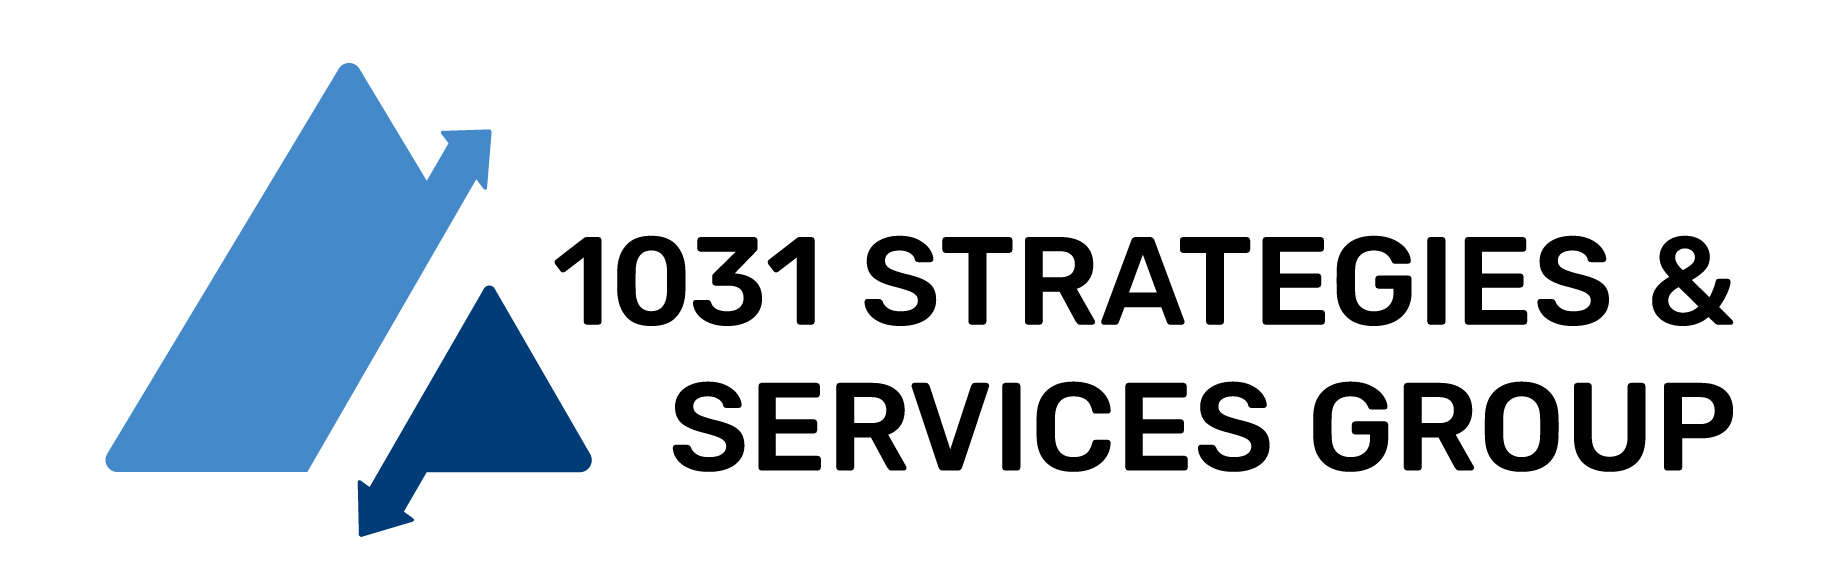 1031 Strategies & Services Group Logo